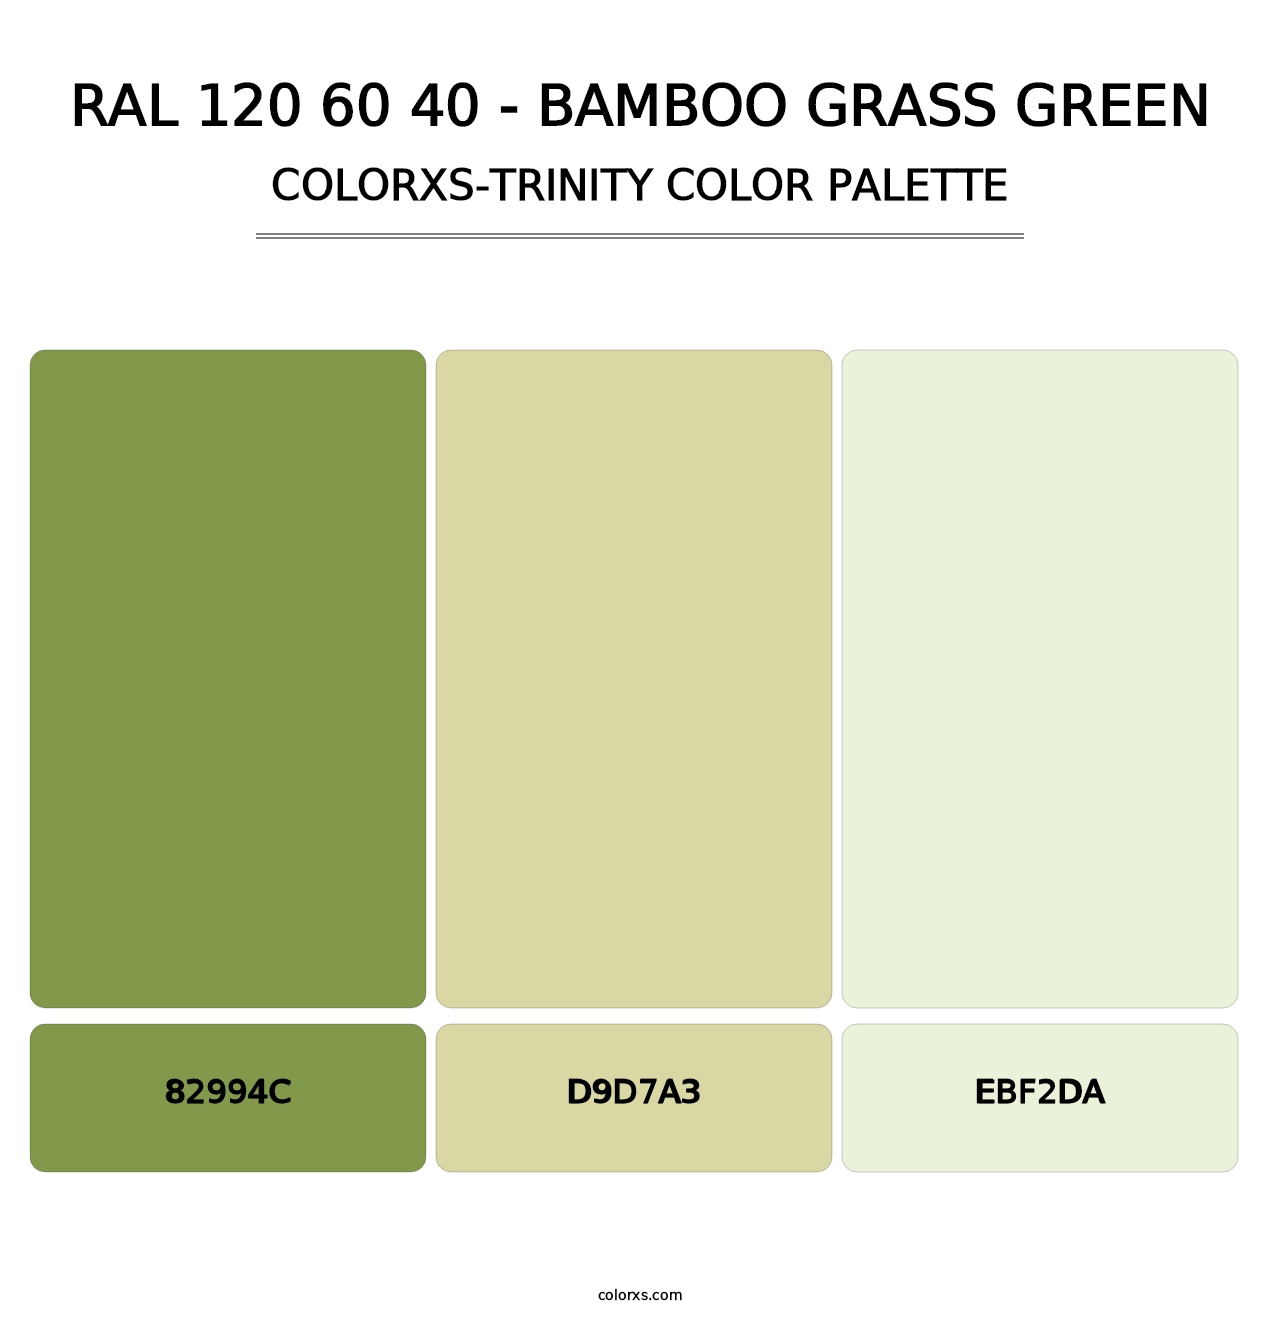 RAL 120 60 40 - Bamboo Grass Green - Colorxs Trinity Palette